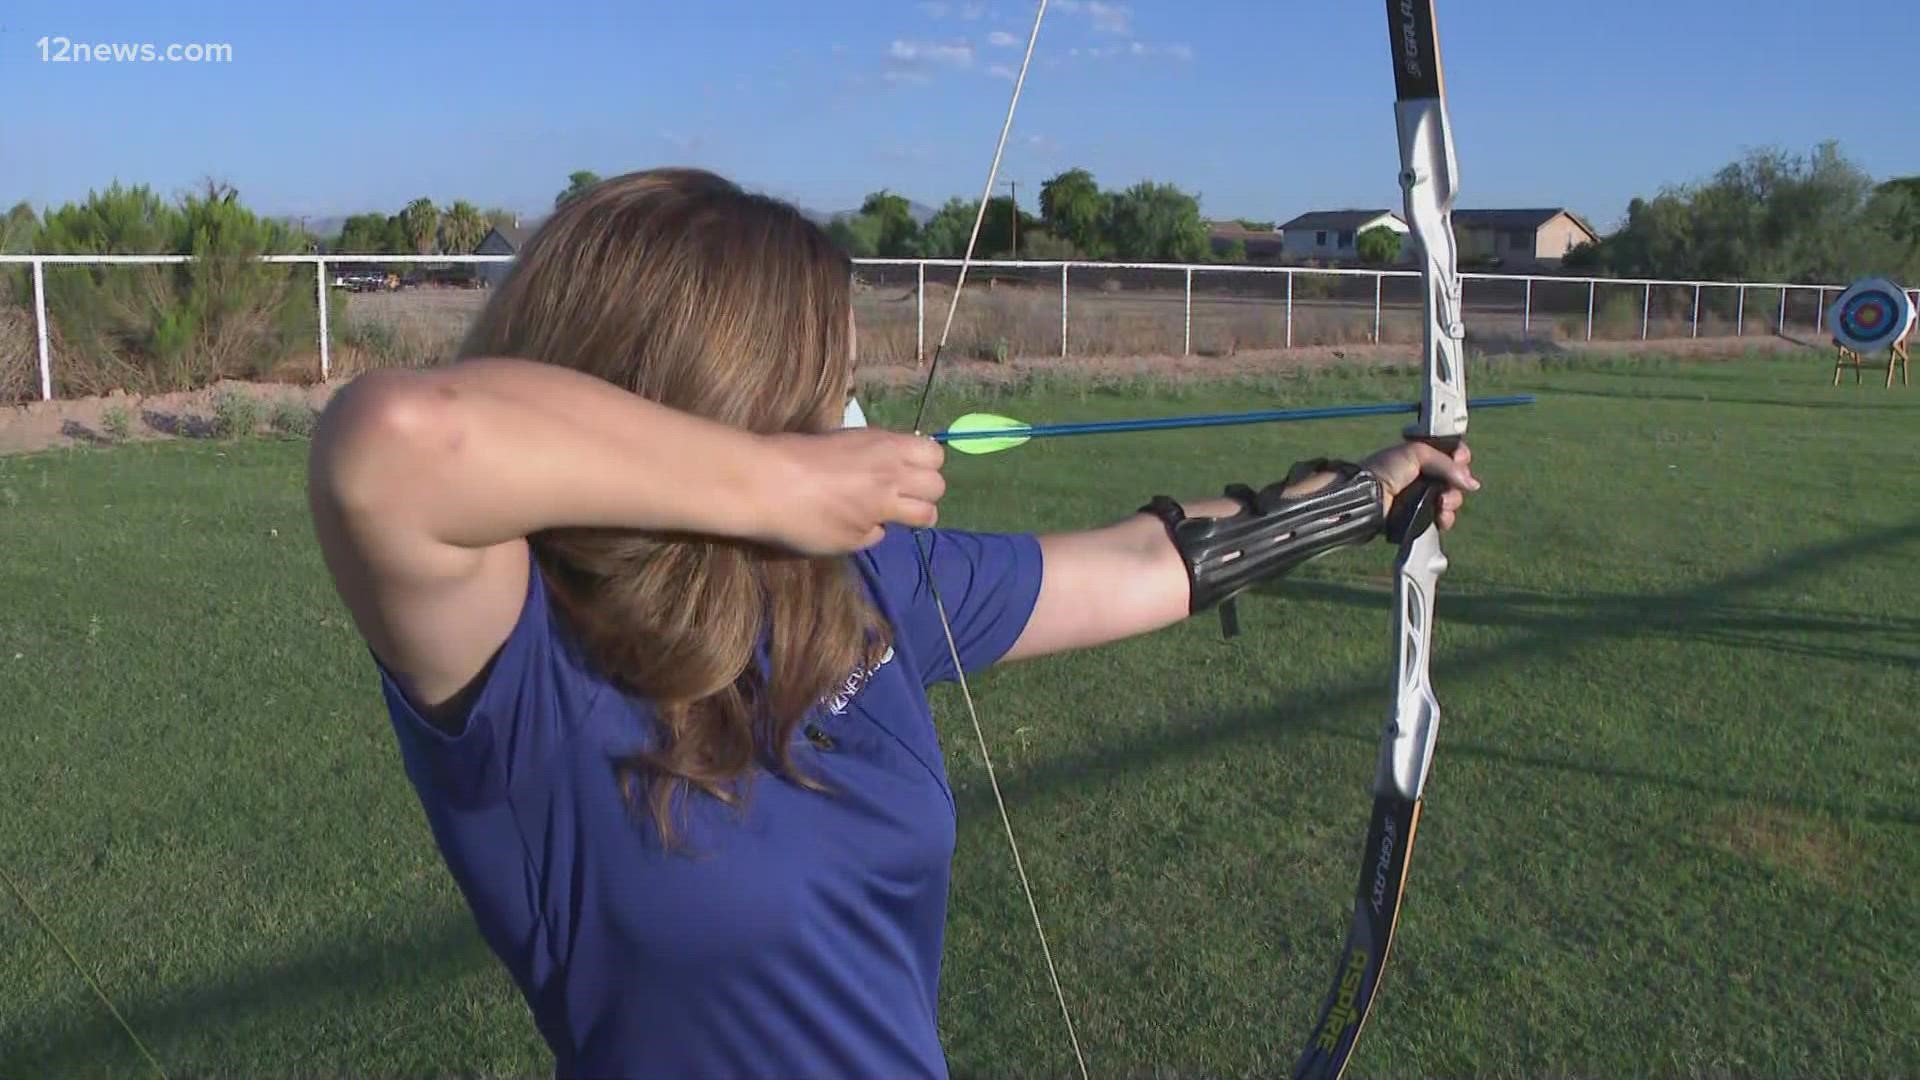 Want to try your hand at archery? Jen Wahl shows us how you can train like an Olympic archer in the Valley.